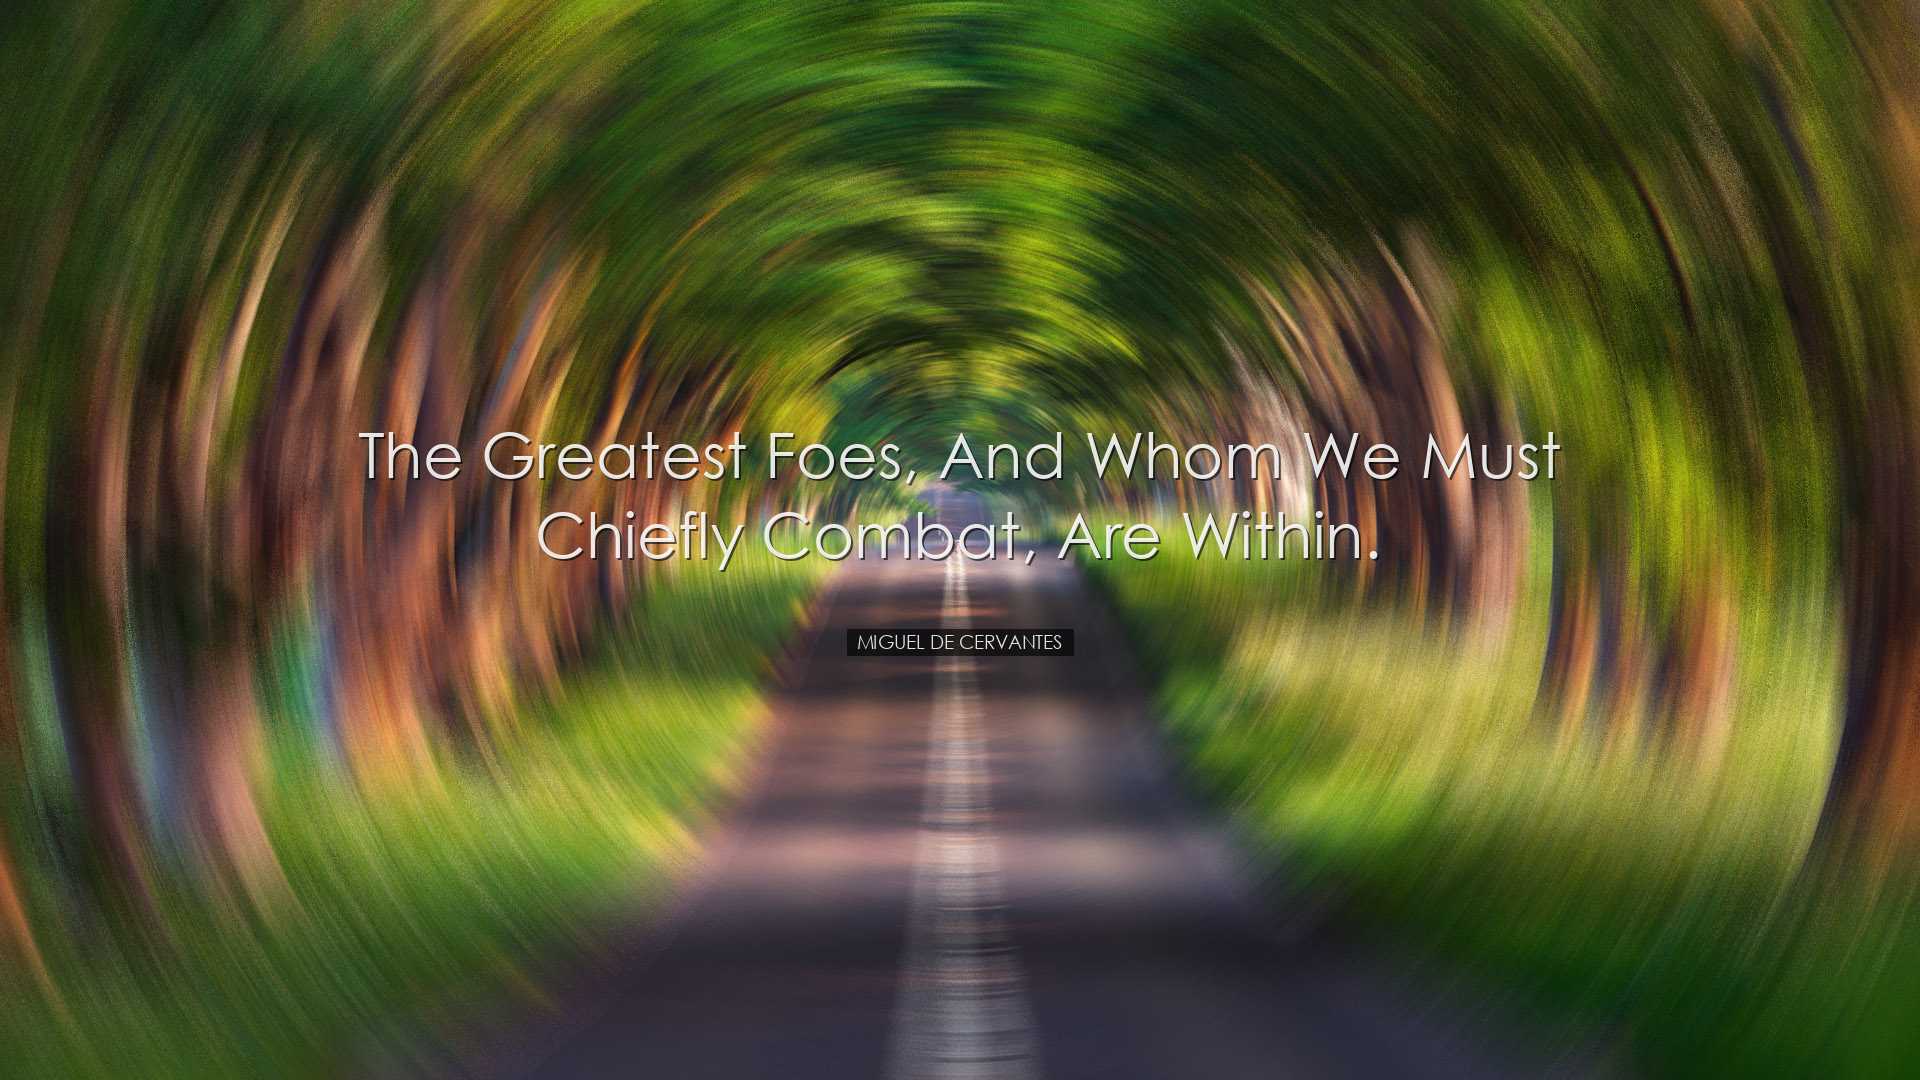 The greatest foes, and whom we must chiefly combat, are within. -